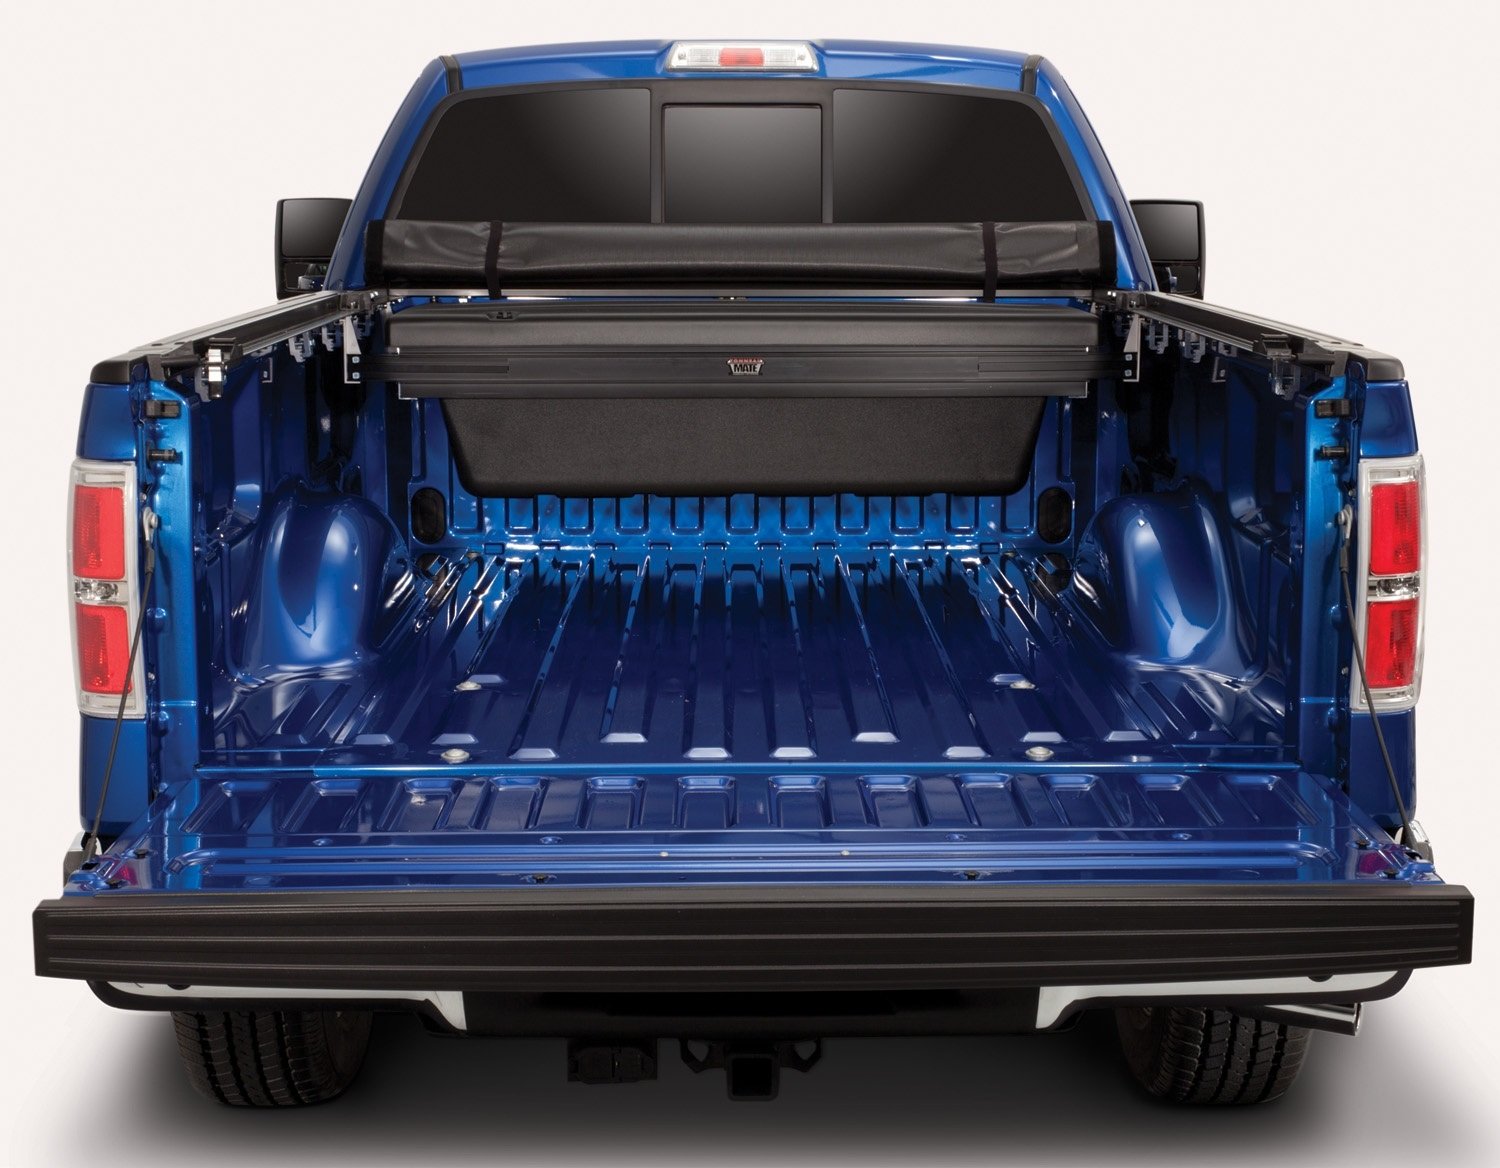 TruXedo Truck Luggage - TonneauMate Toolbox installed in a blue truck